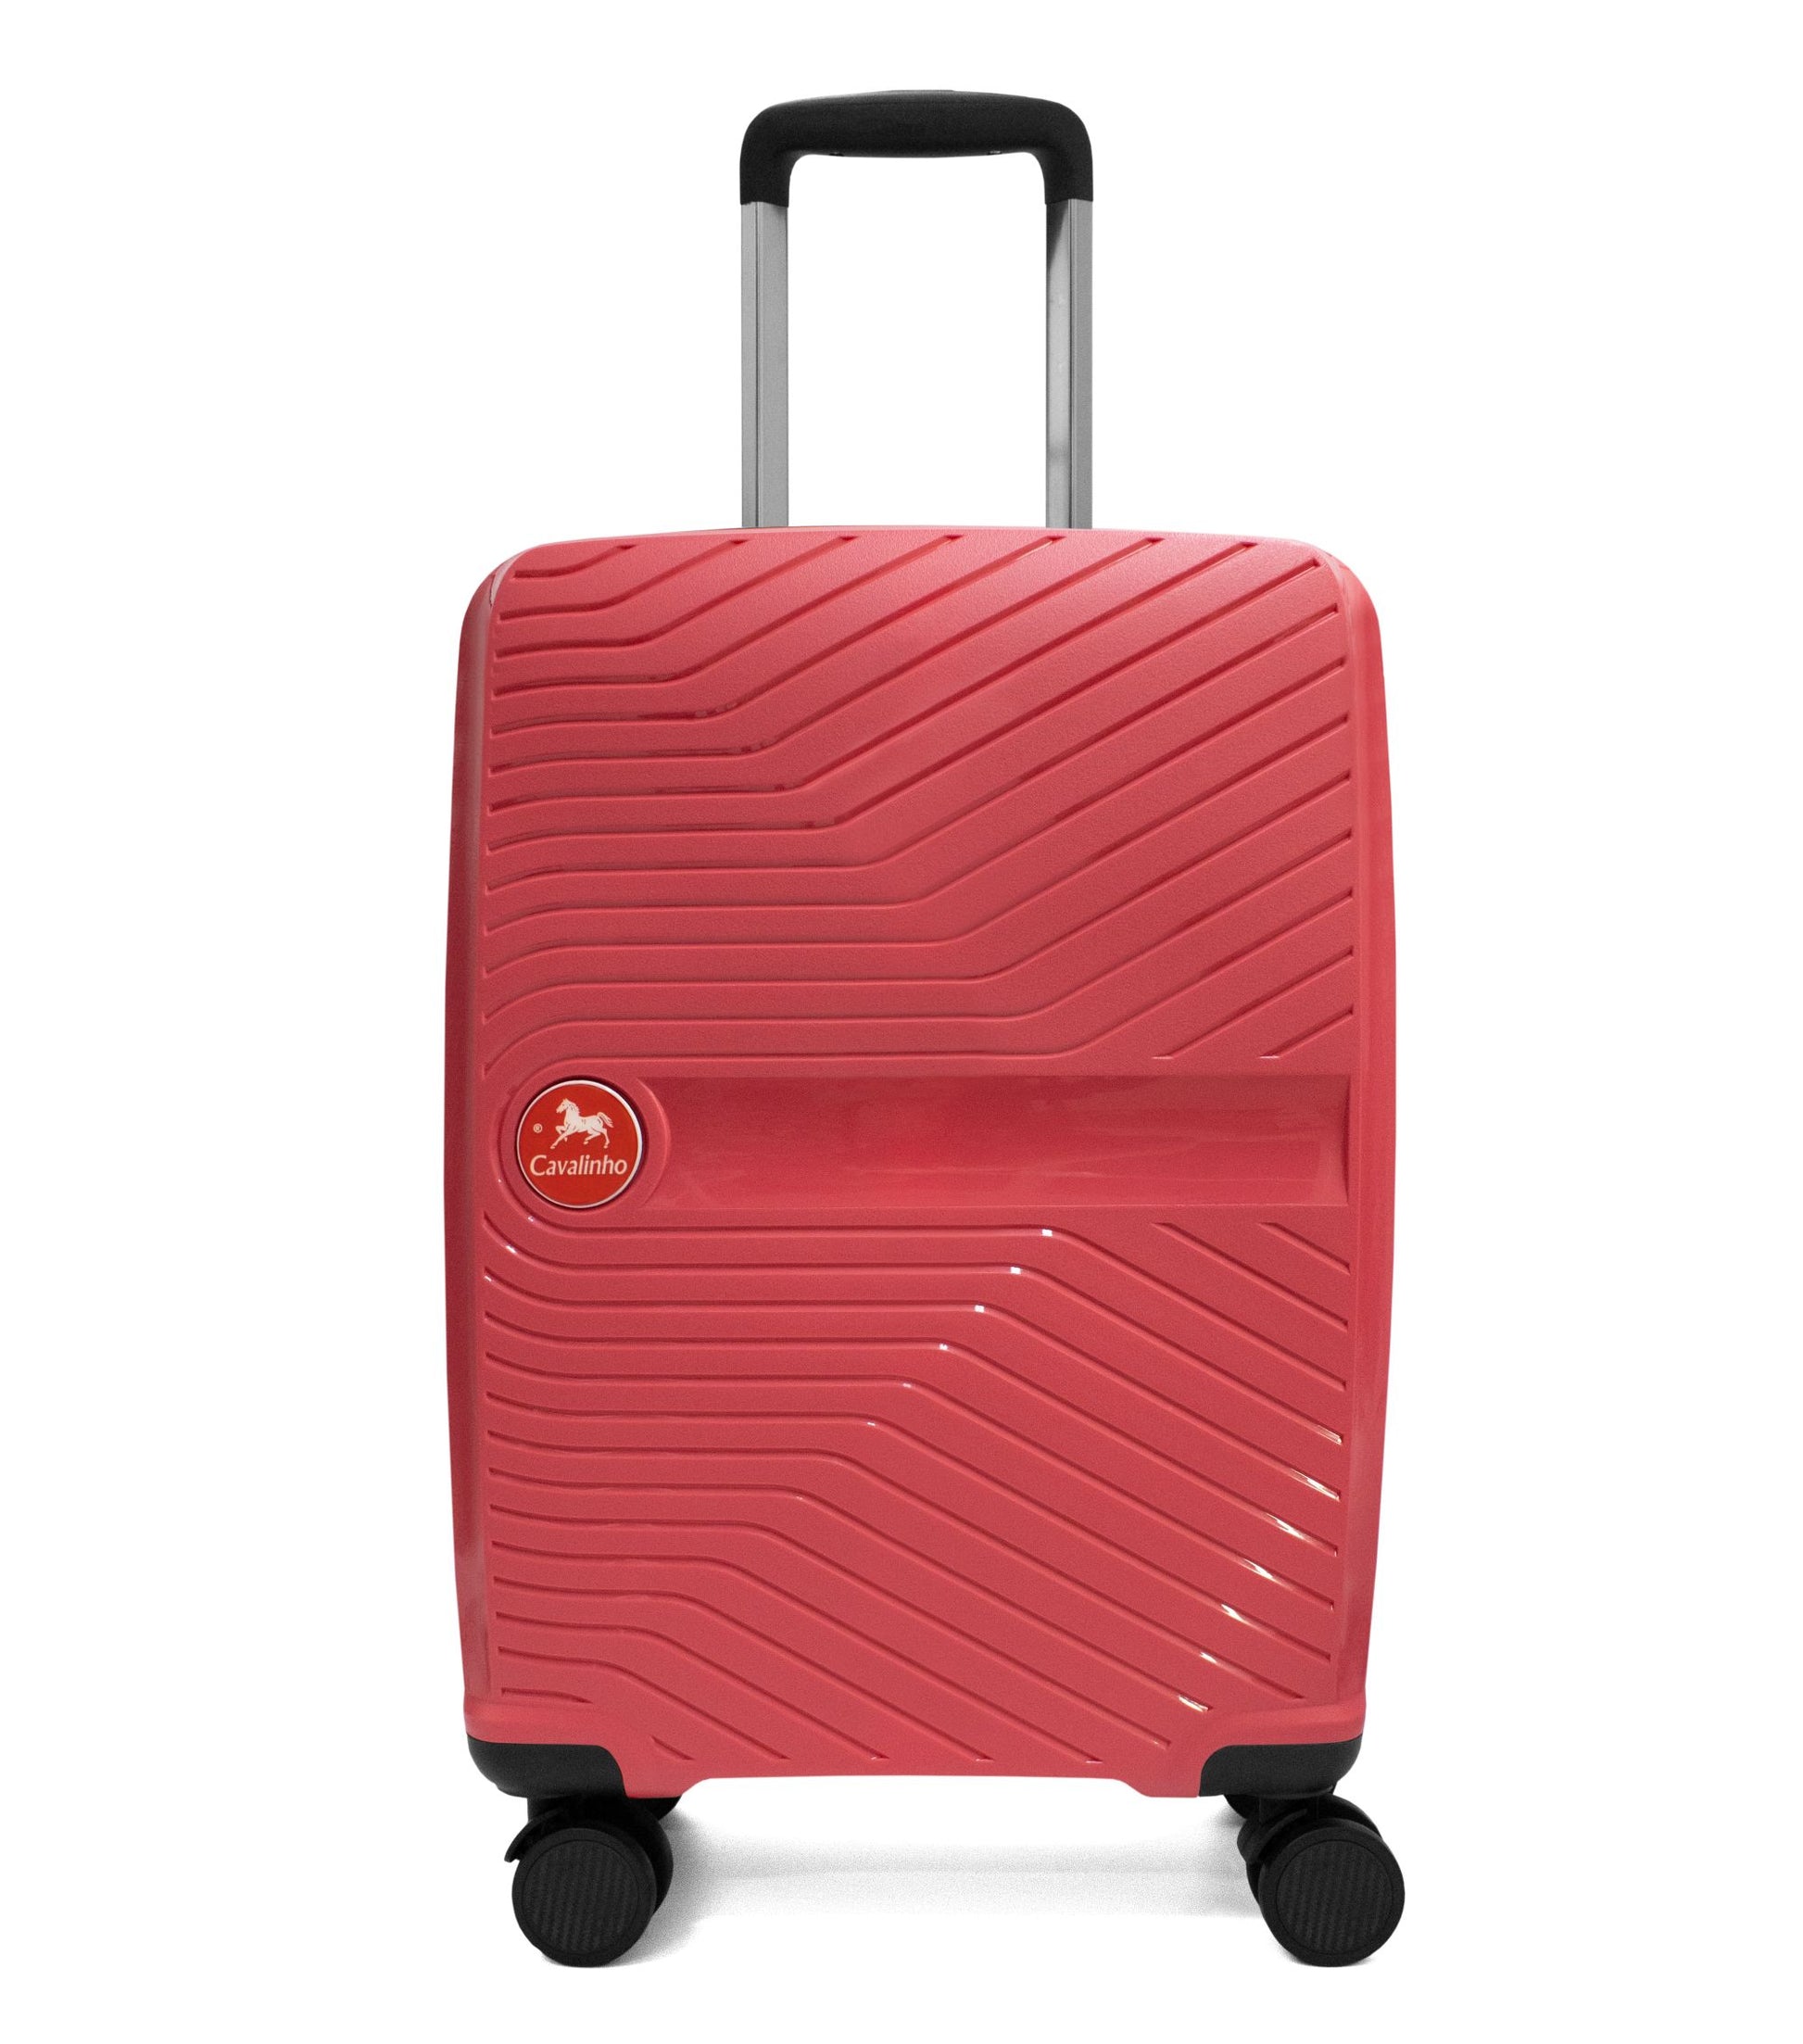 #color_ 19 inch Coral | Cavalinho Colorful Carry-on Hardside Luggage (19") - 19 inch Coral - 68020004.27.19_1